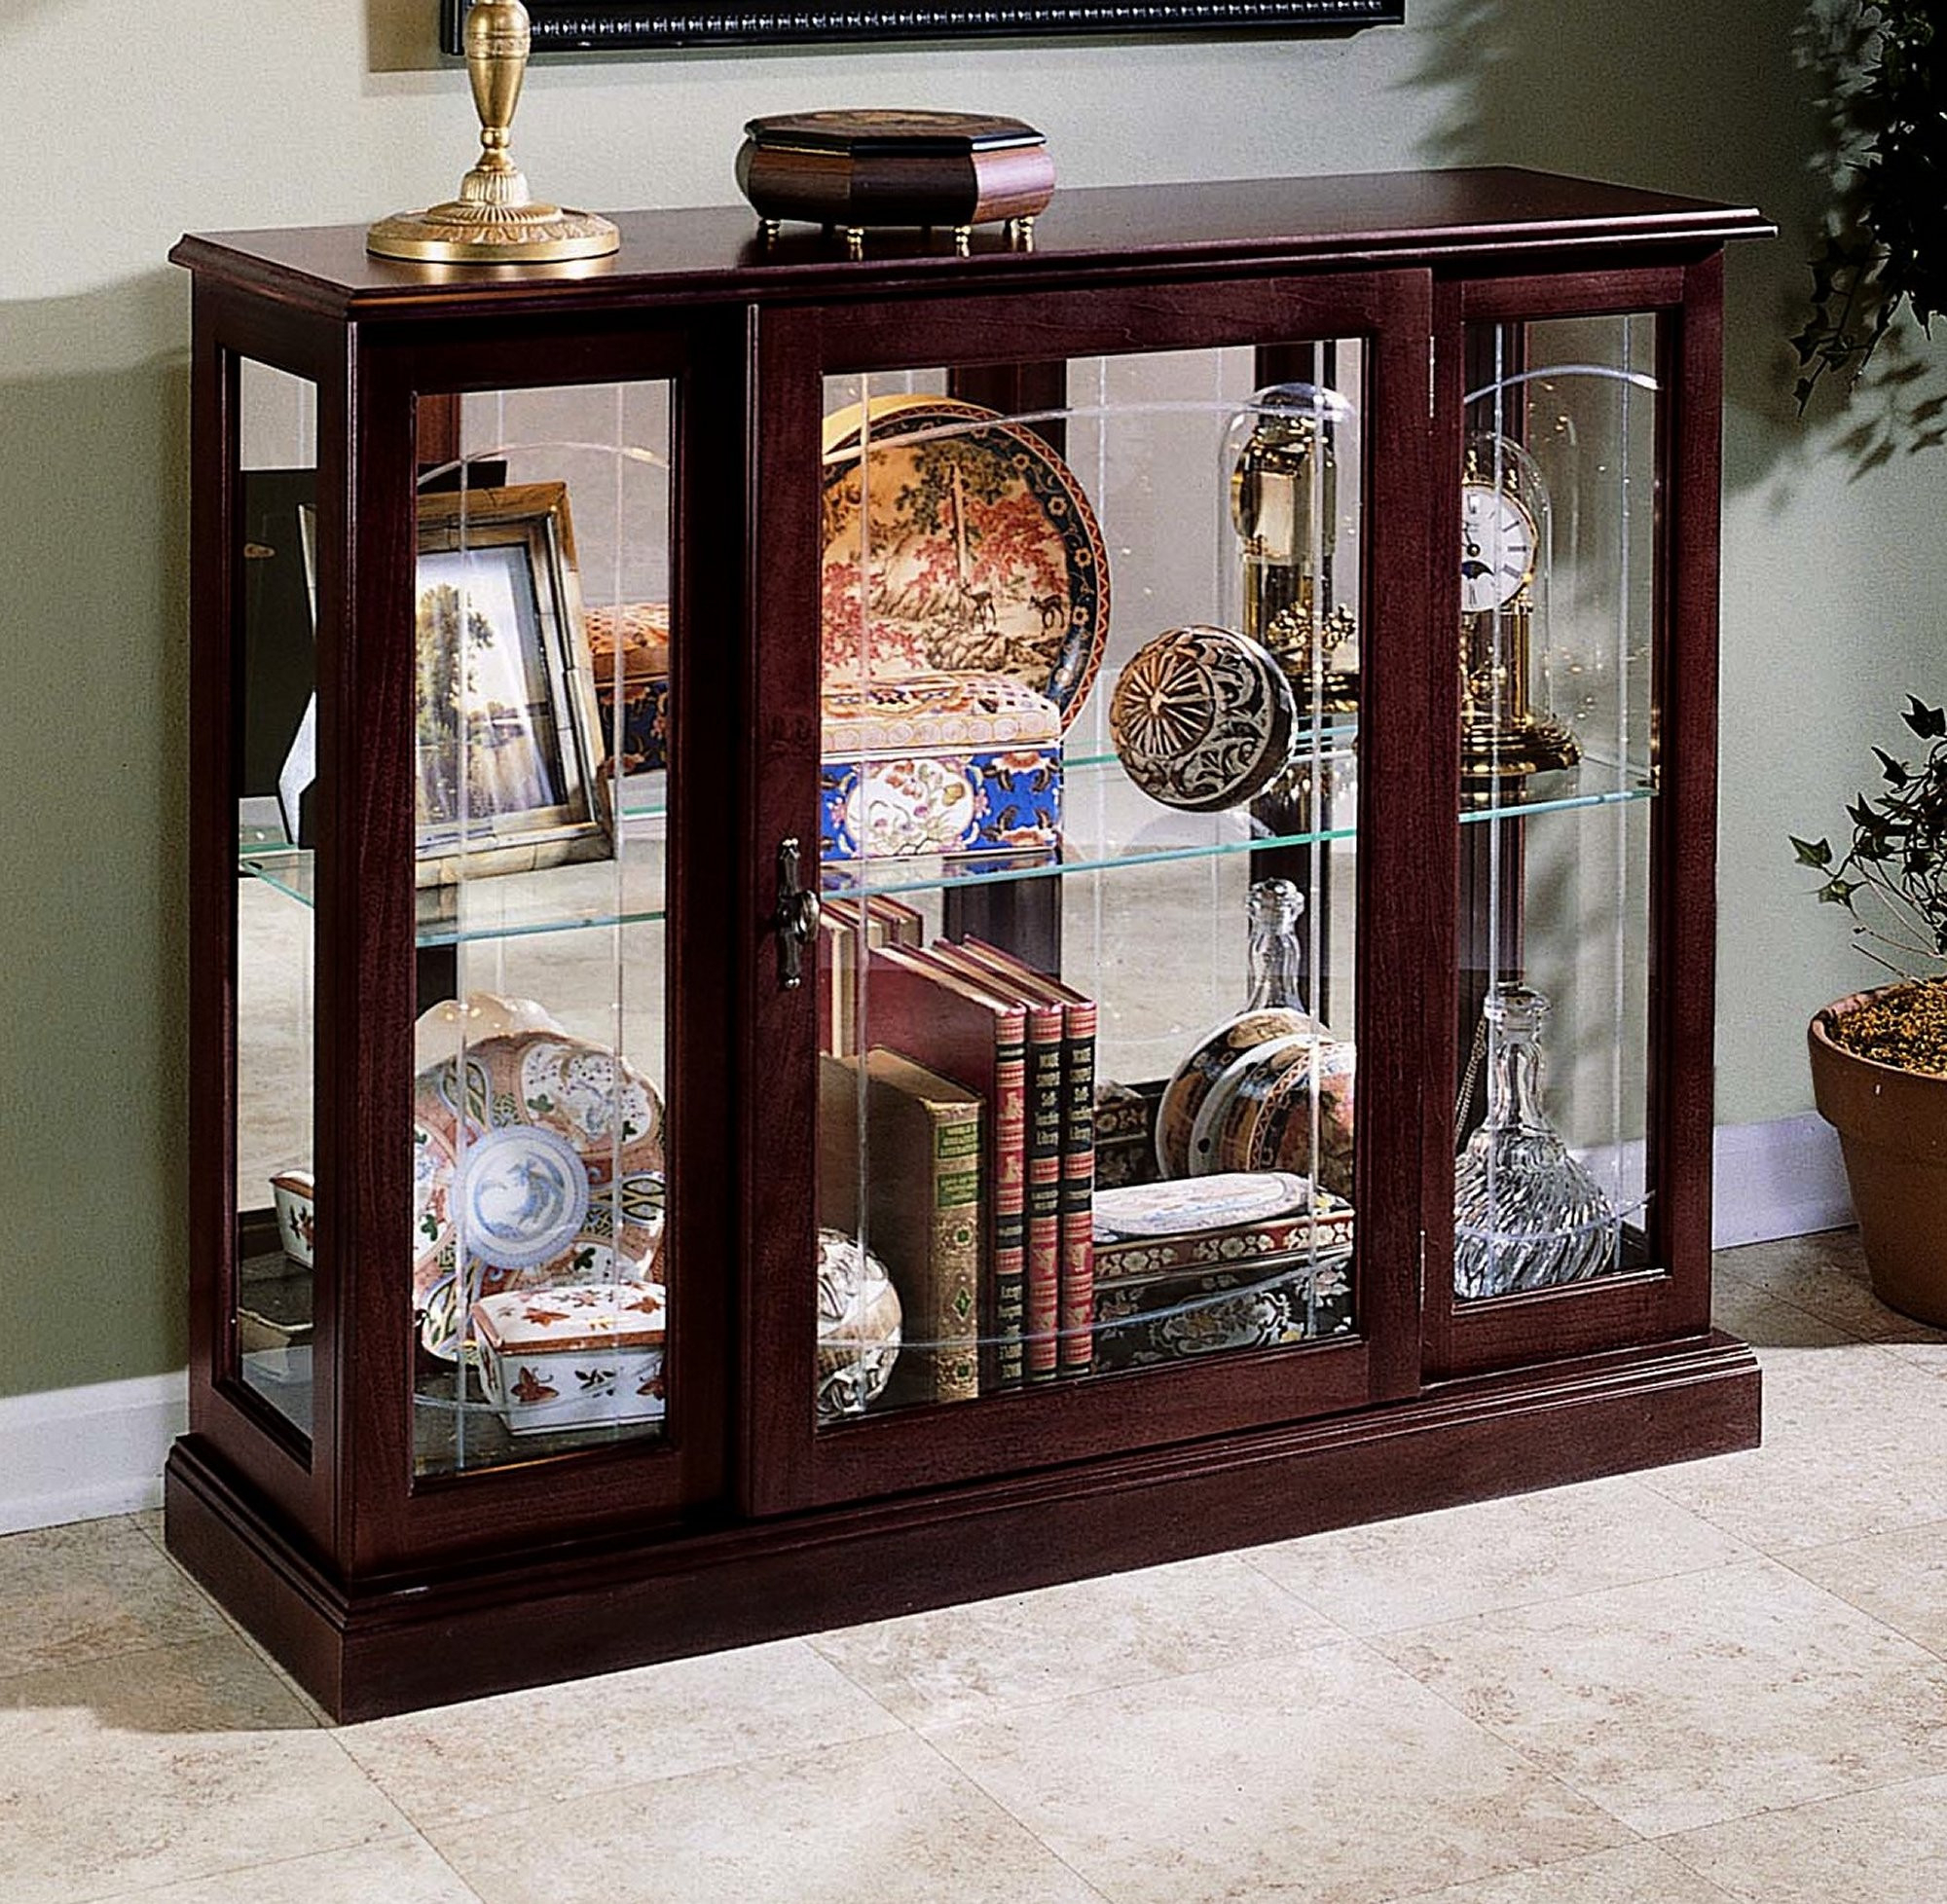 Chinese Light Brown Stain Treasure Display Curio Cabinet Room